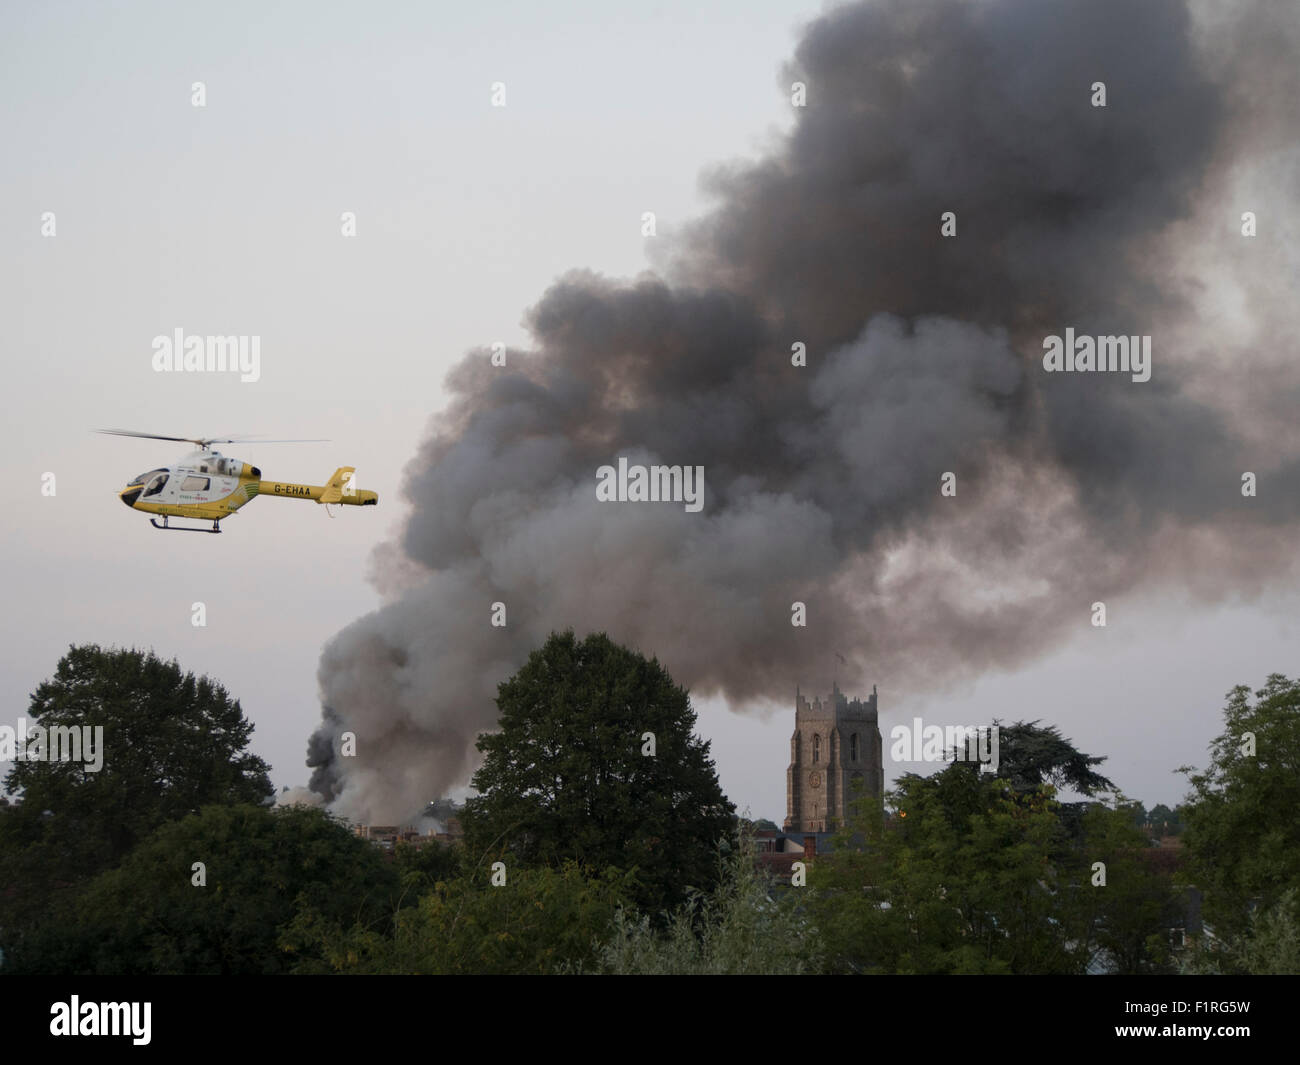 An air ambulance from the Essex and Herts air ambulance service hovers near a fire in the center of Sudbury, Suffolk, UK.. 2015. Stock Photo